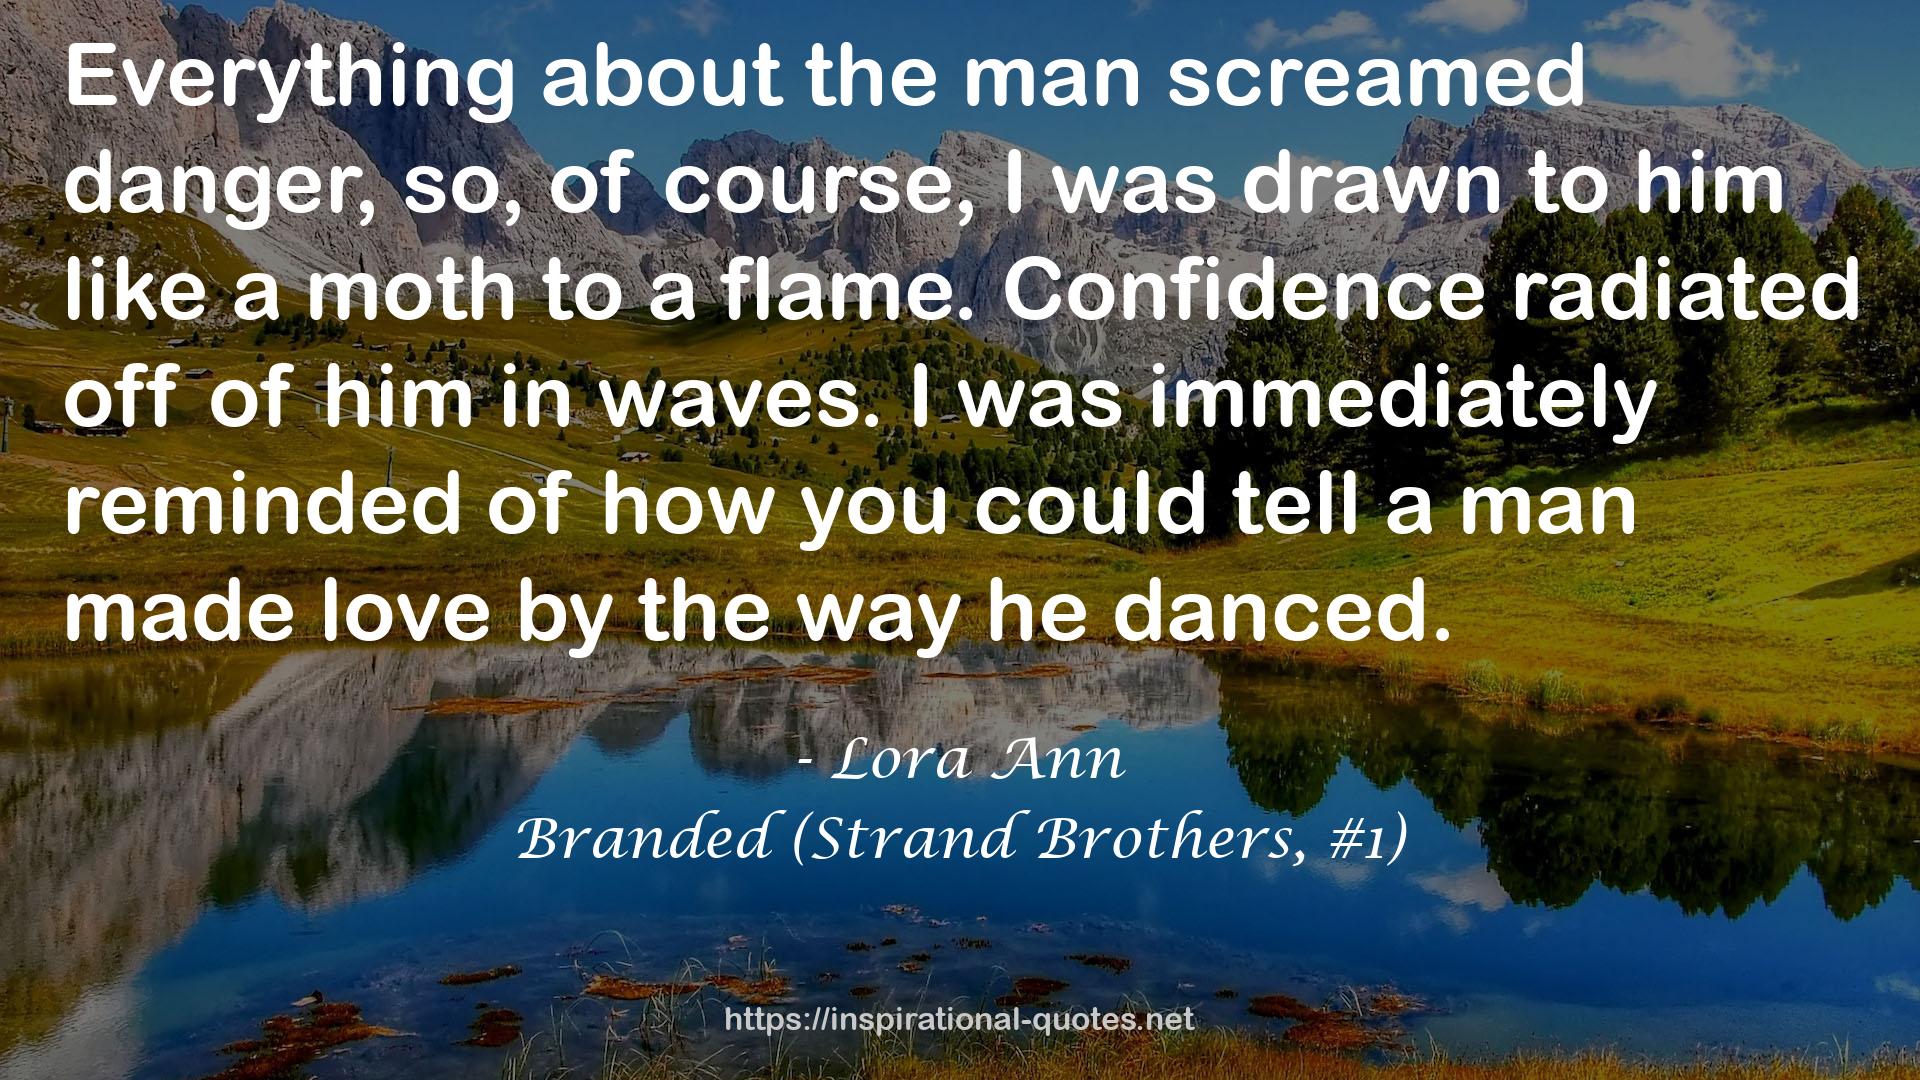 Branded (Strand Brothers, #1) QUOTES